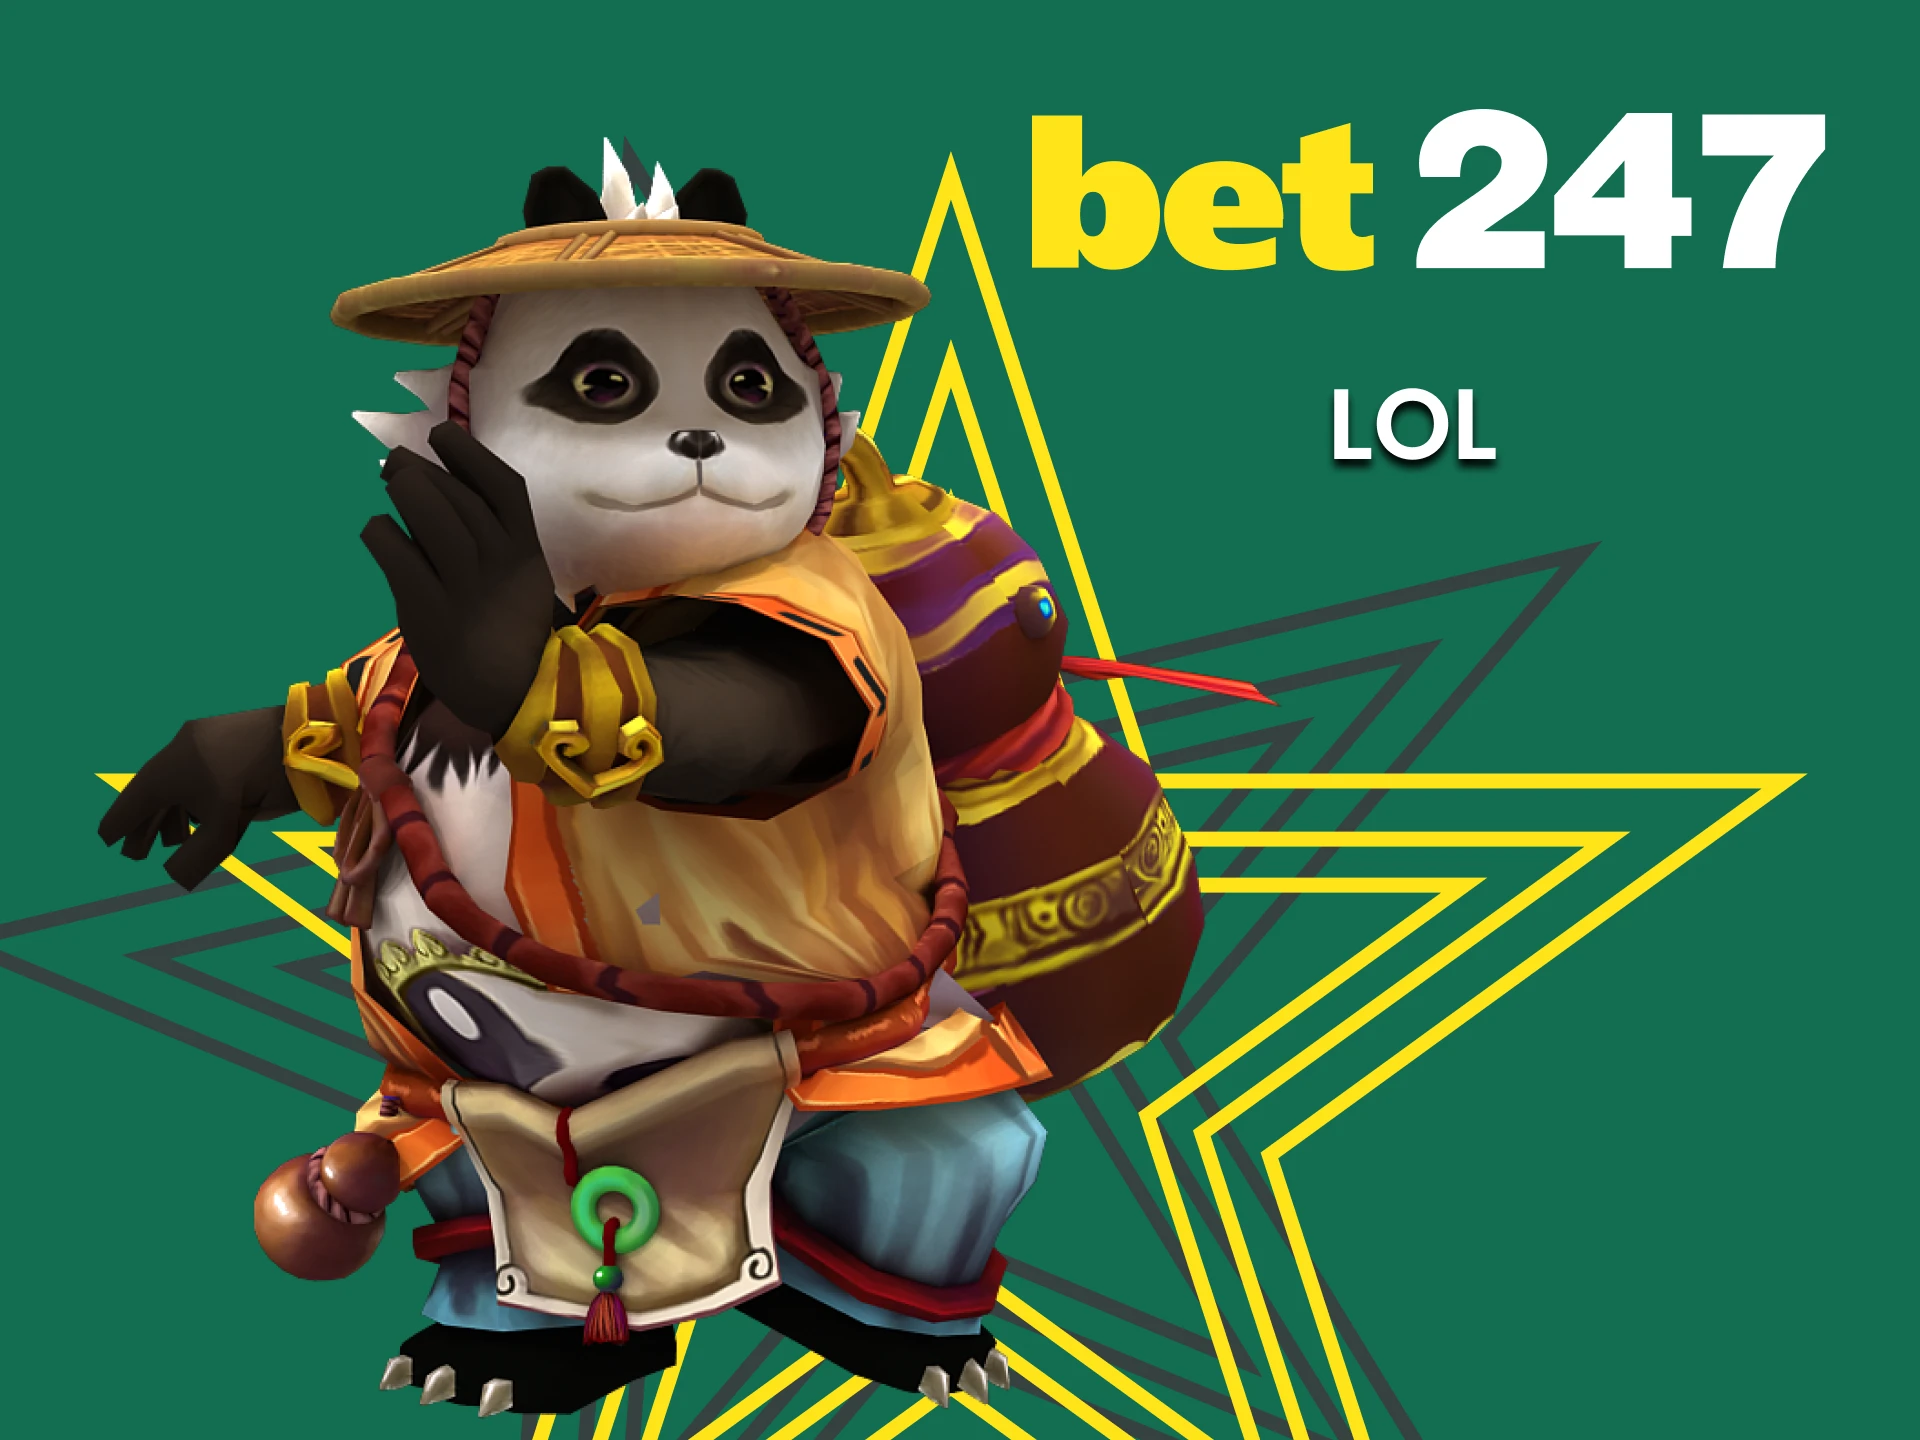 Place your bets on League of Legends at Bet247.